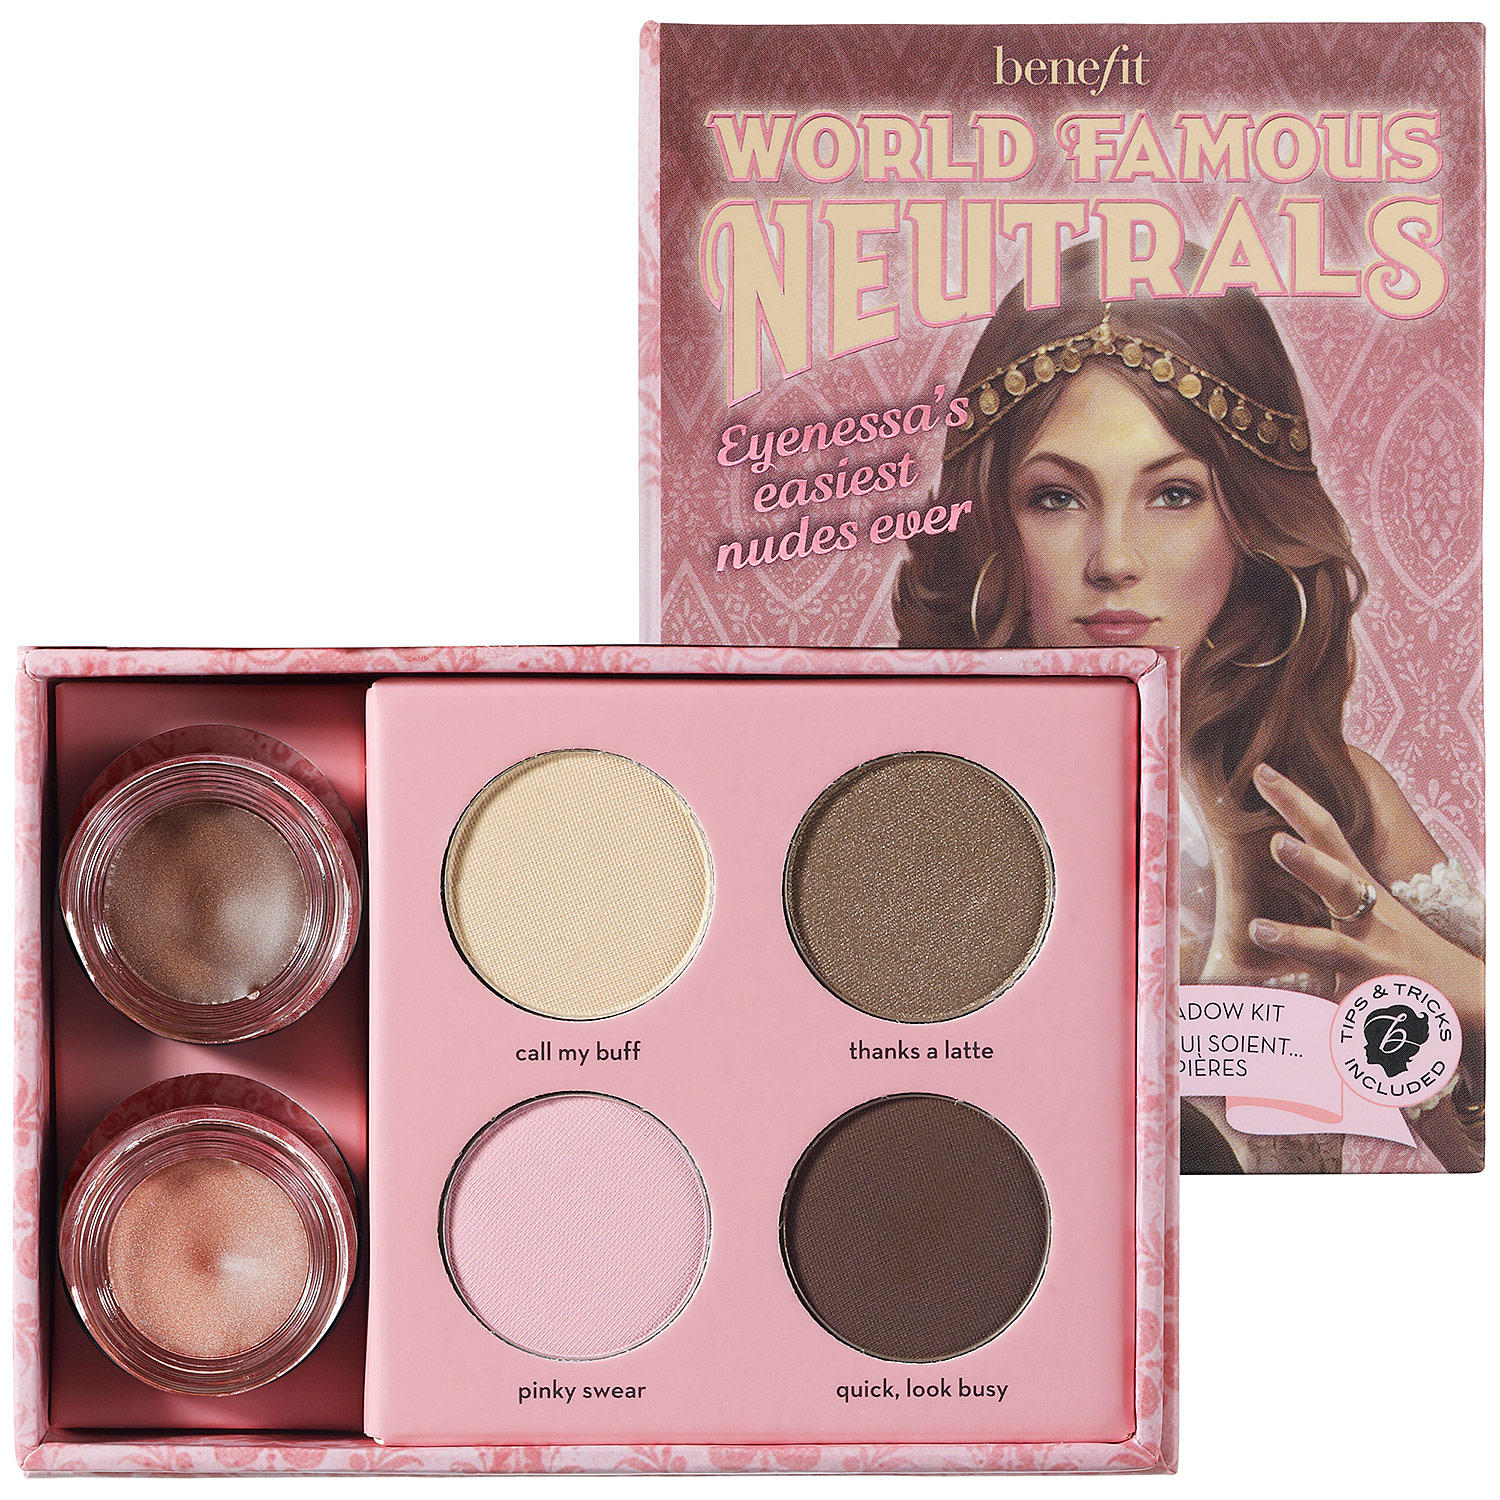 Benefit World Famous Neutrals Easiest Nudes Every Eyeshadow Kit